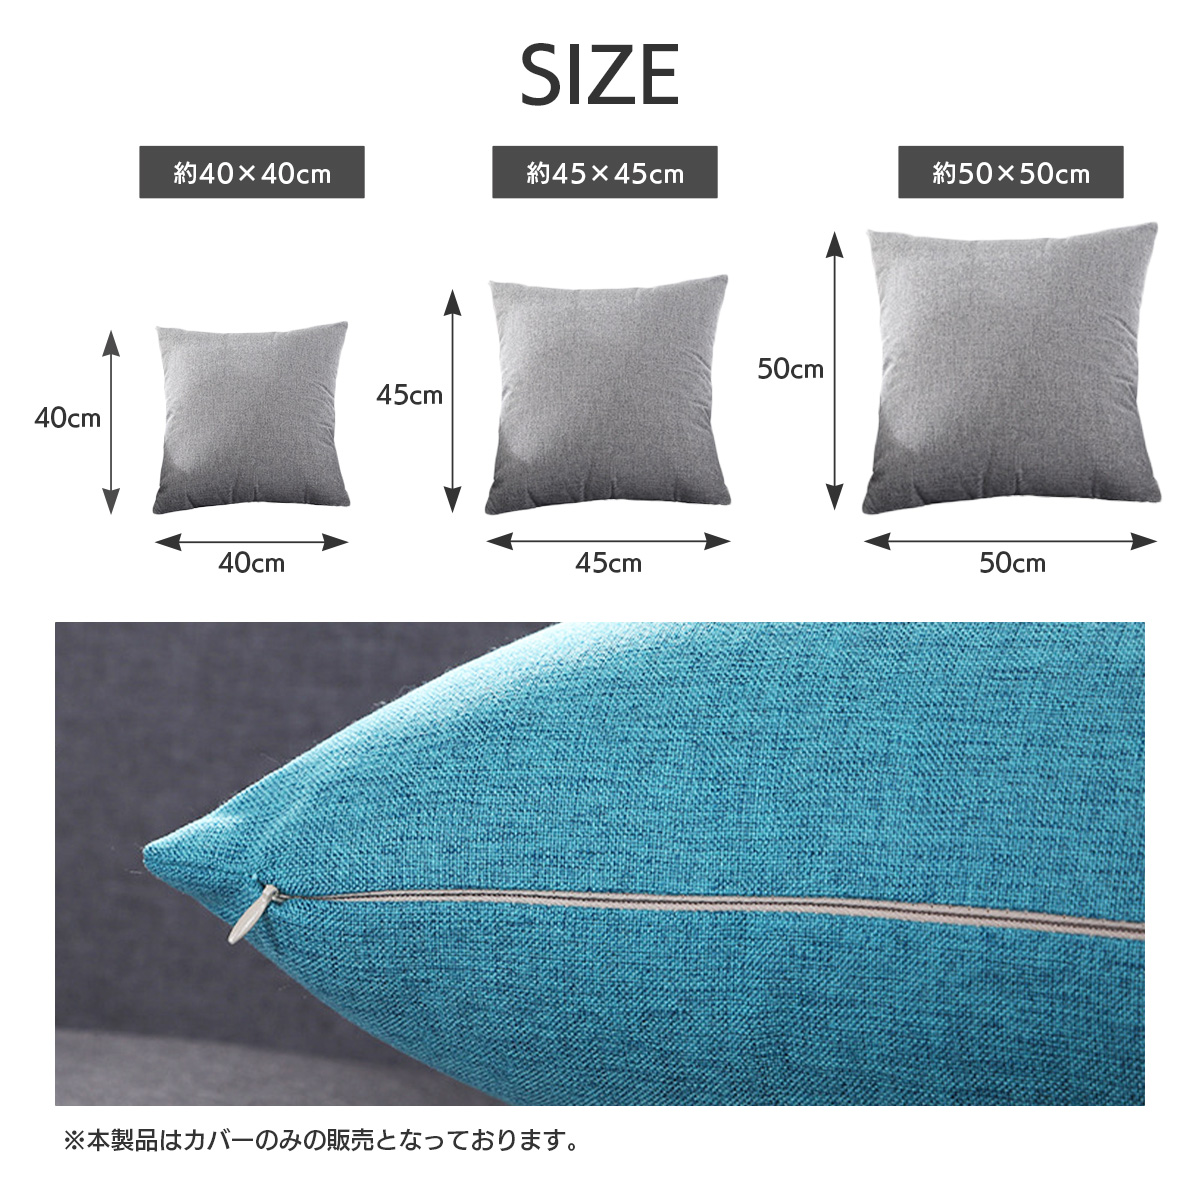  pillowcase Northern Europe manner 45×45cm west coastal area 3 size washing machine washing with water OK stylish cushion sofa cover static electricity prevention through year spring summer autumn winter 